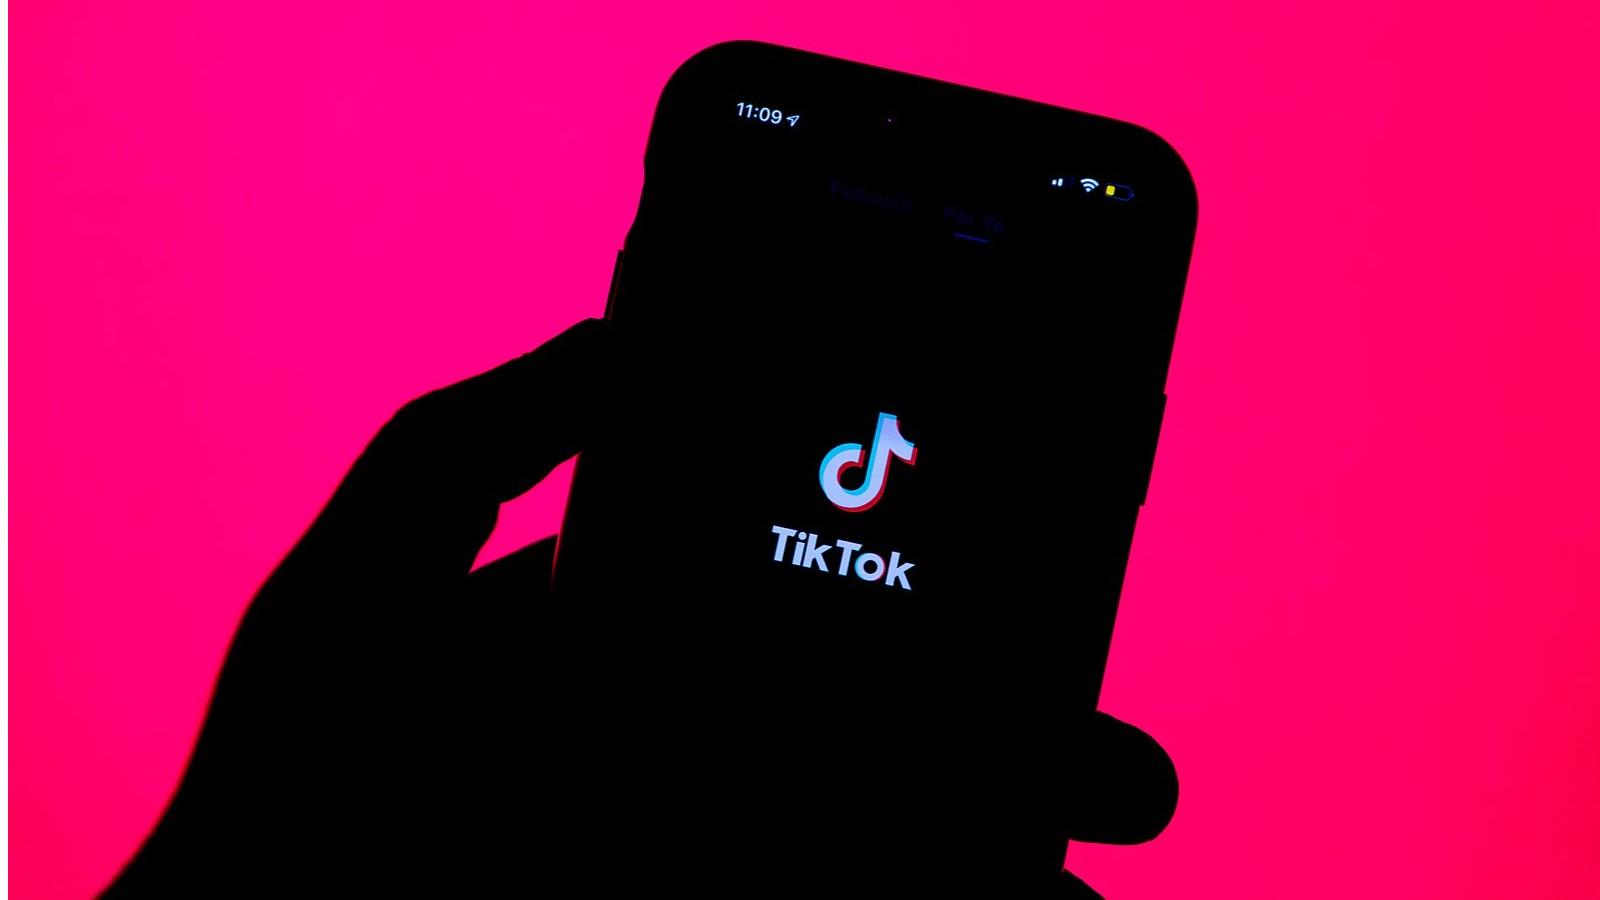 What Does Slay Mean On TikTok? A Guide To Common Acronyms And Slang